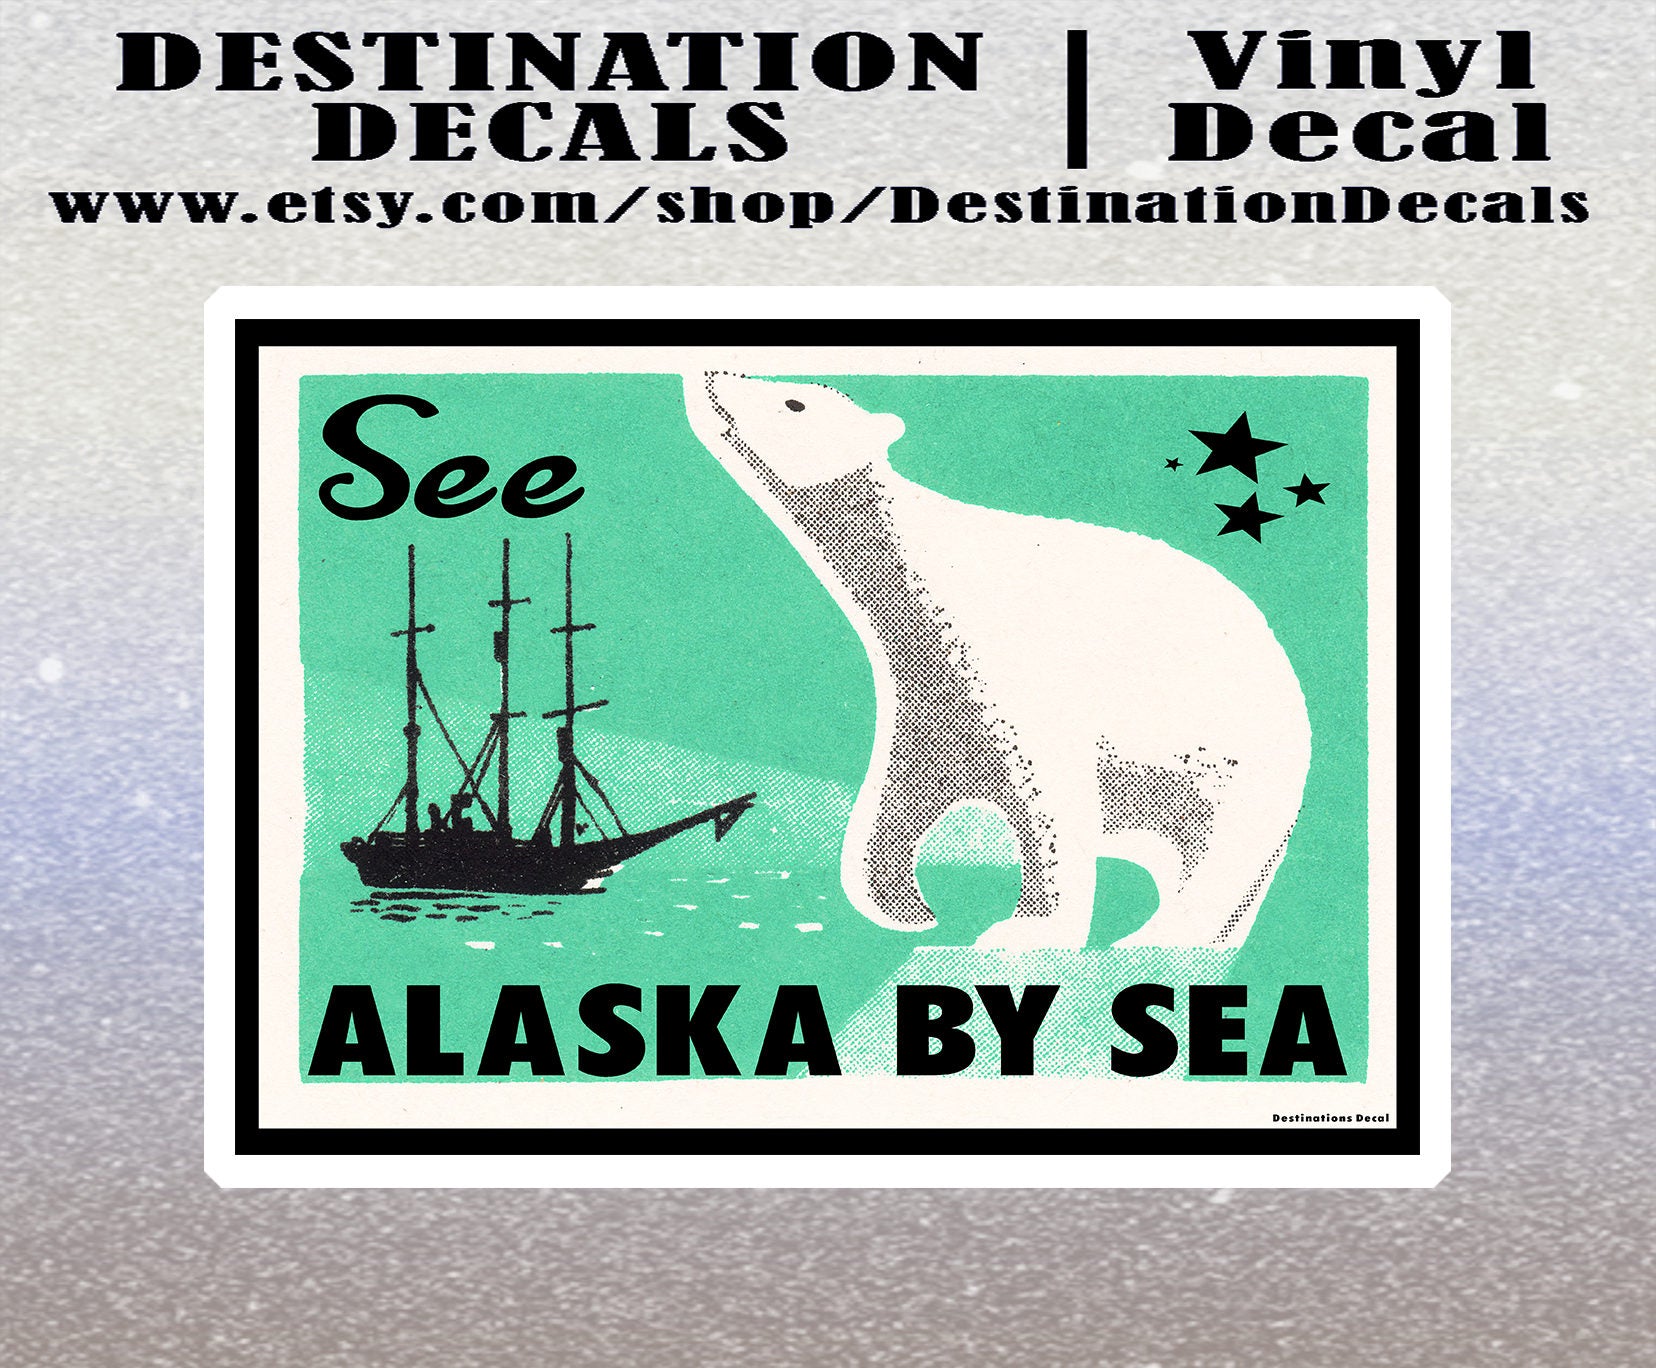 Alaska By Sea Decal Sticker 4" x 2.8" Bering Sea Vintage Old Style